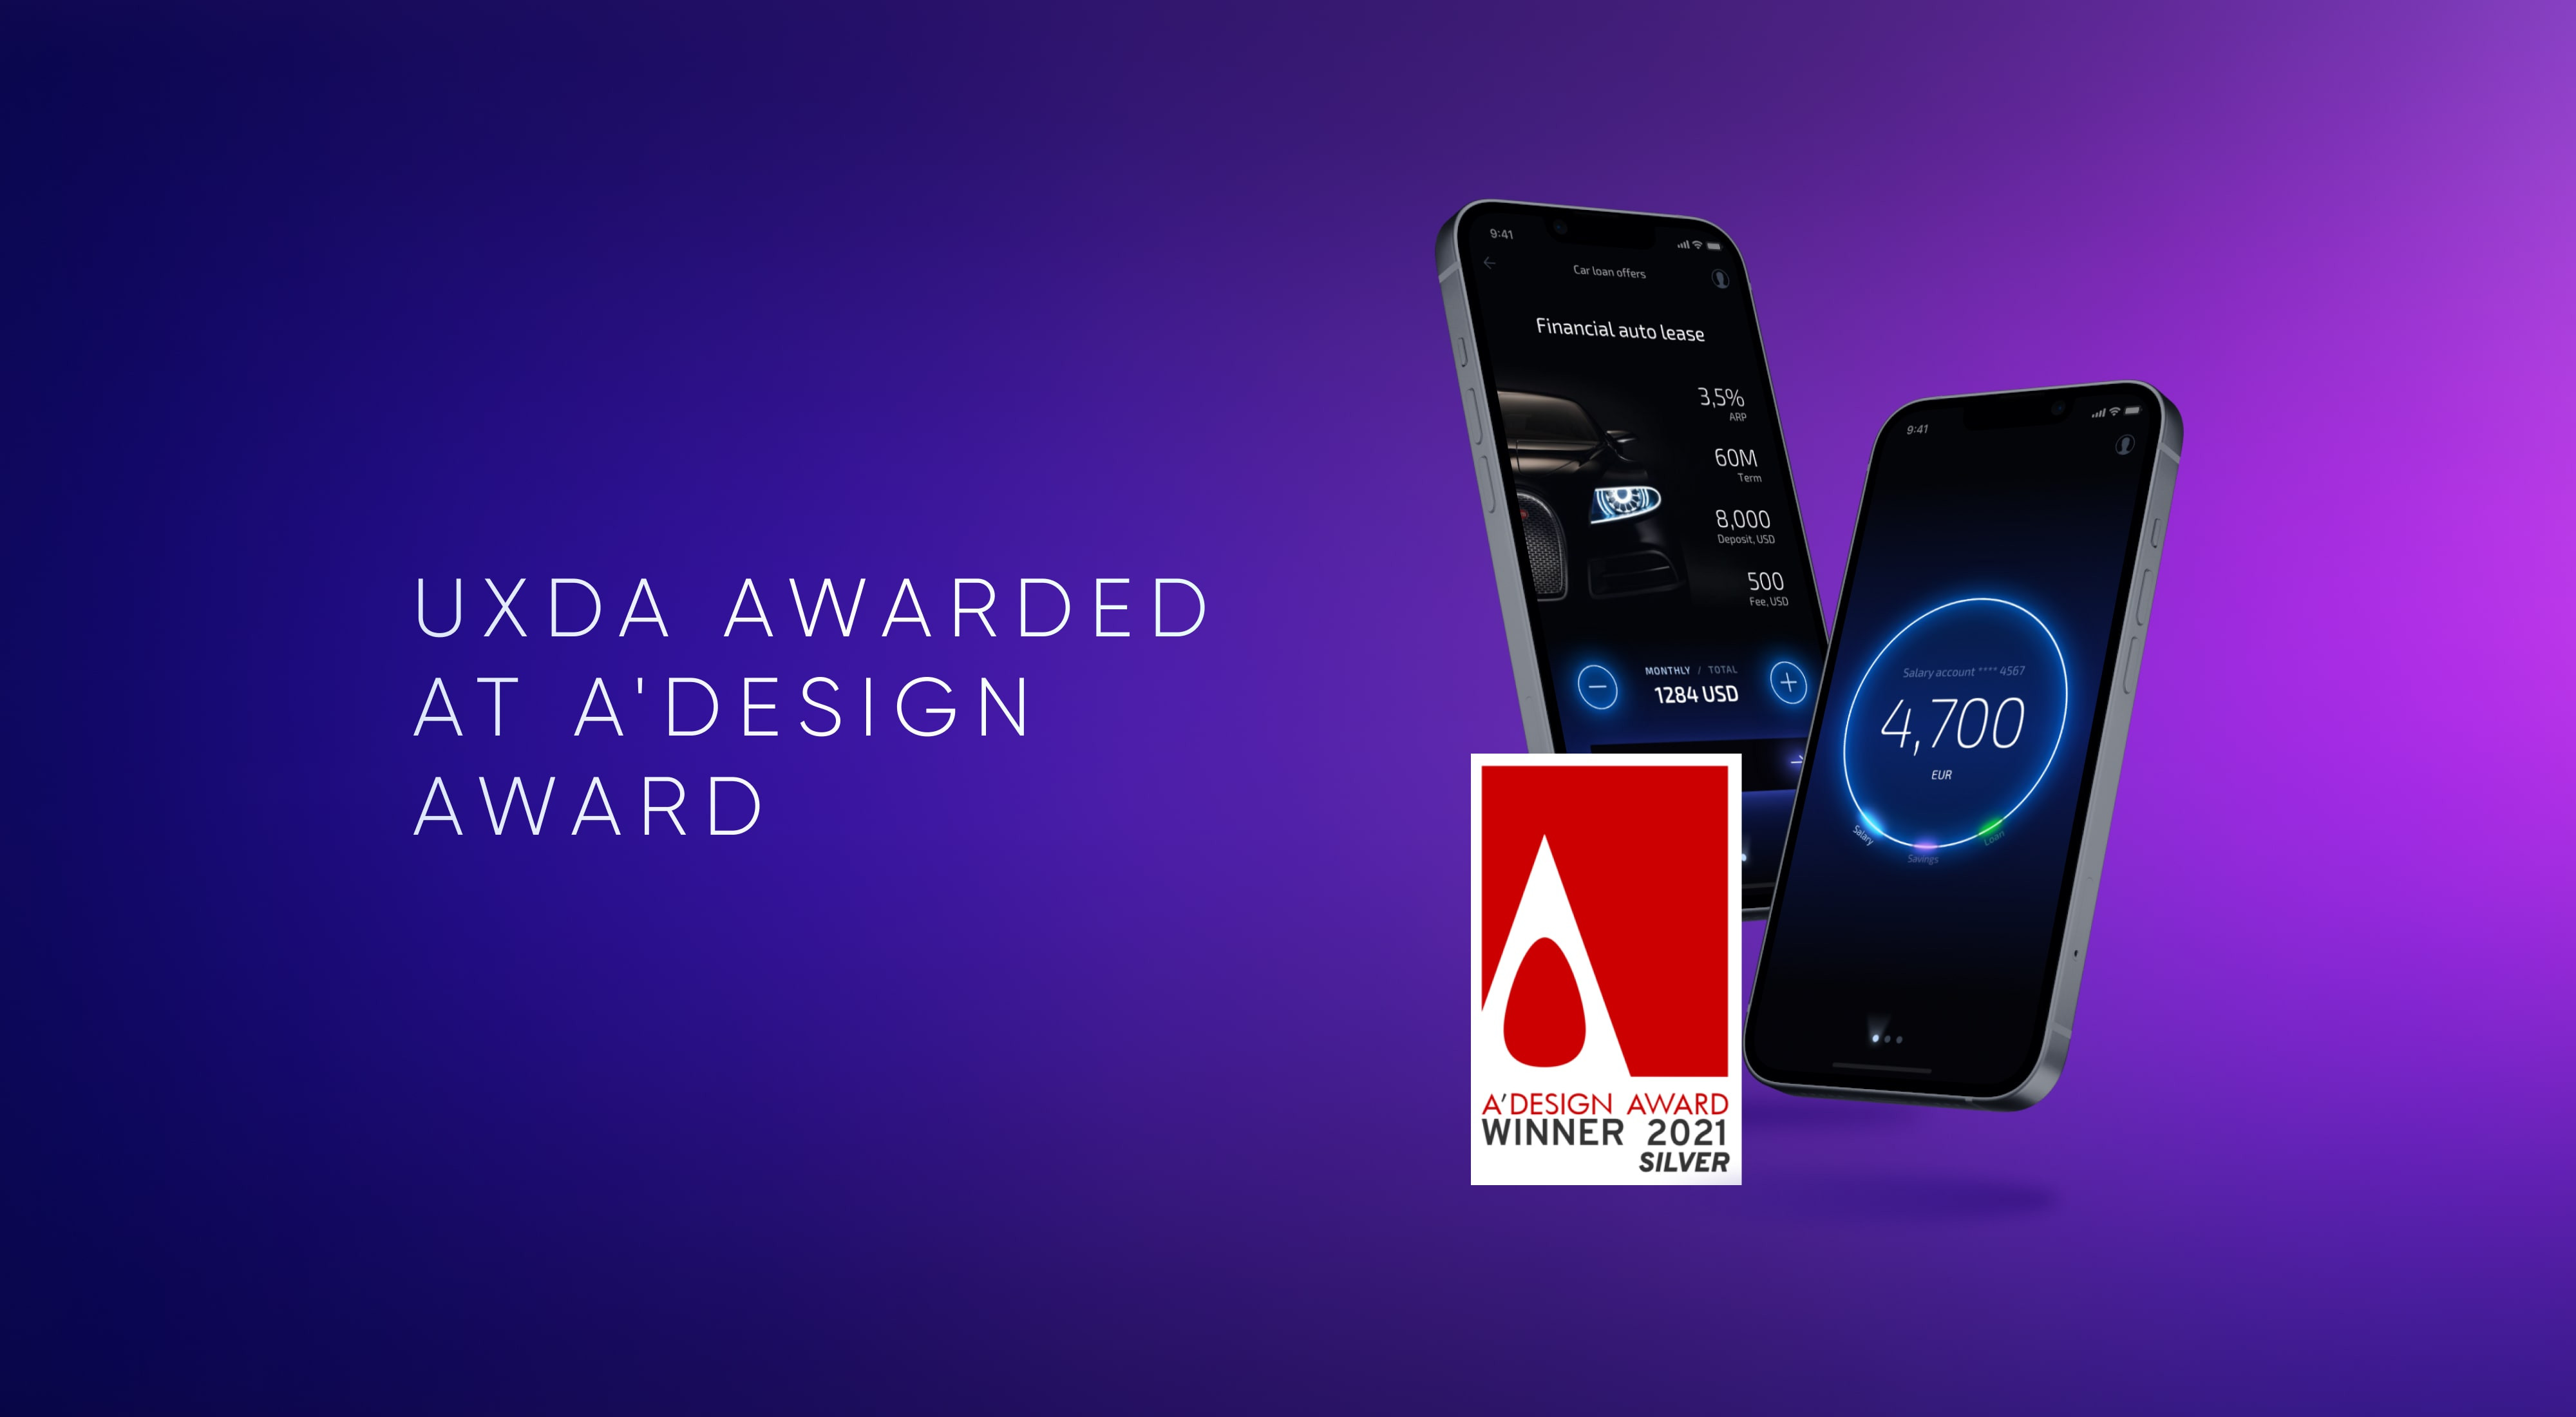 UXDA Awarded at the World's Largest Design Competition - A'Design Award